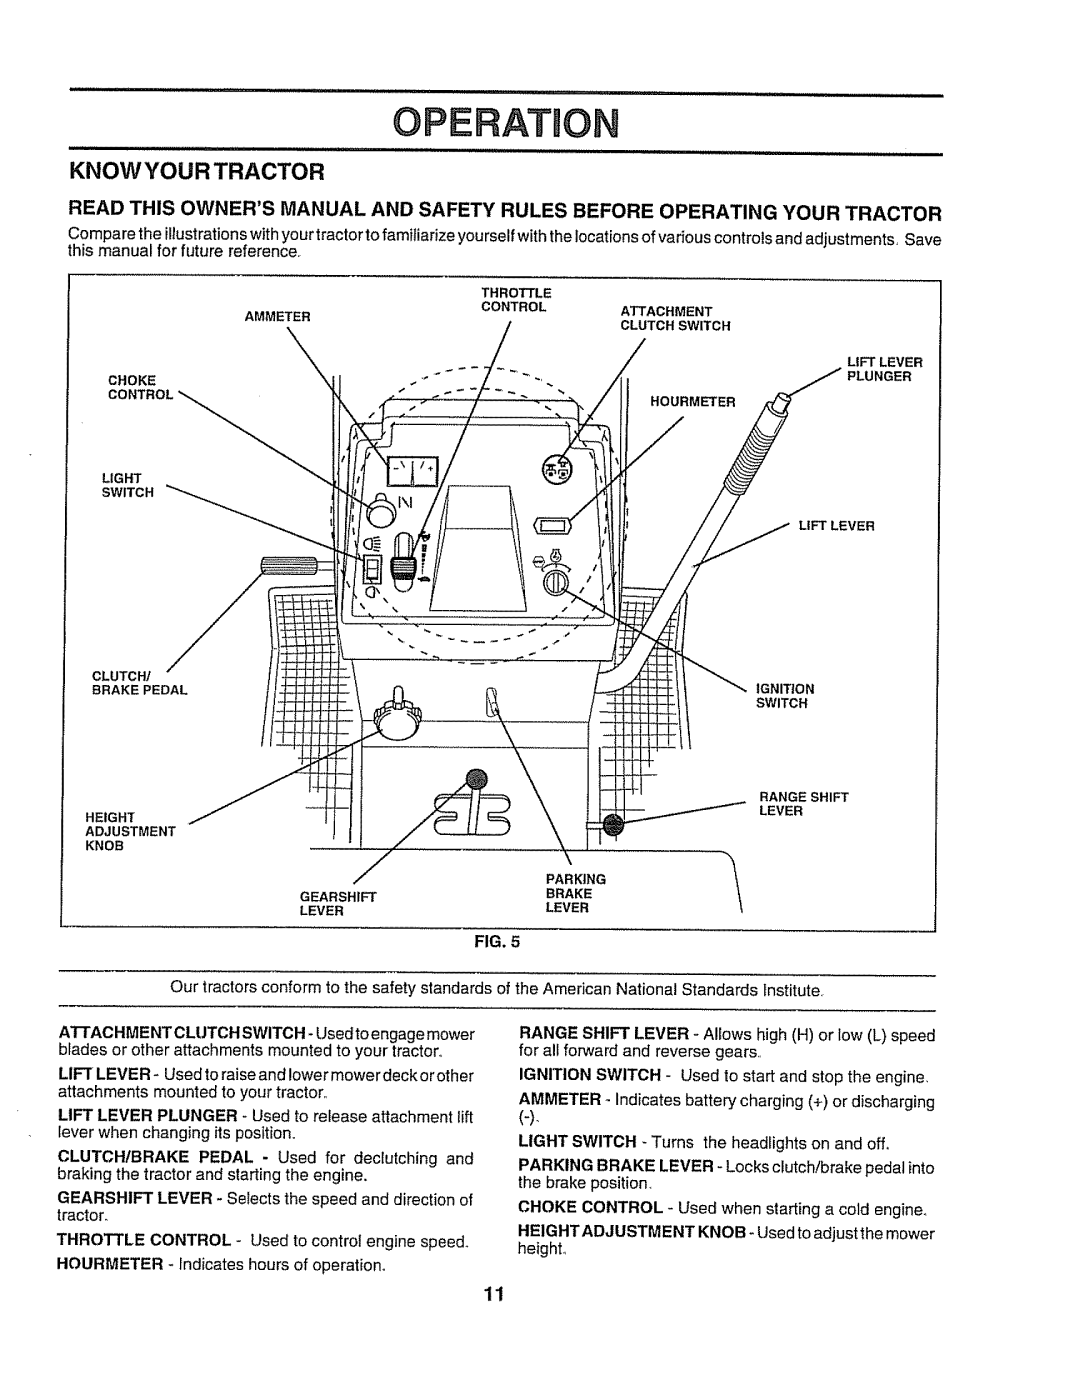 Craftsman 917O251550 owner manual Operation, Knowyourtractor, Fig 